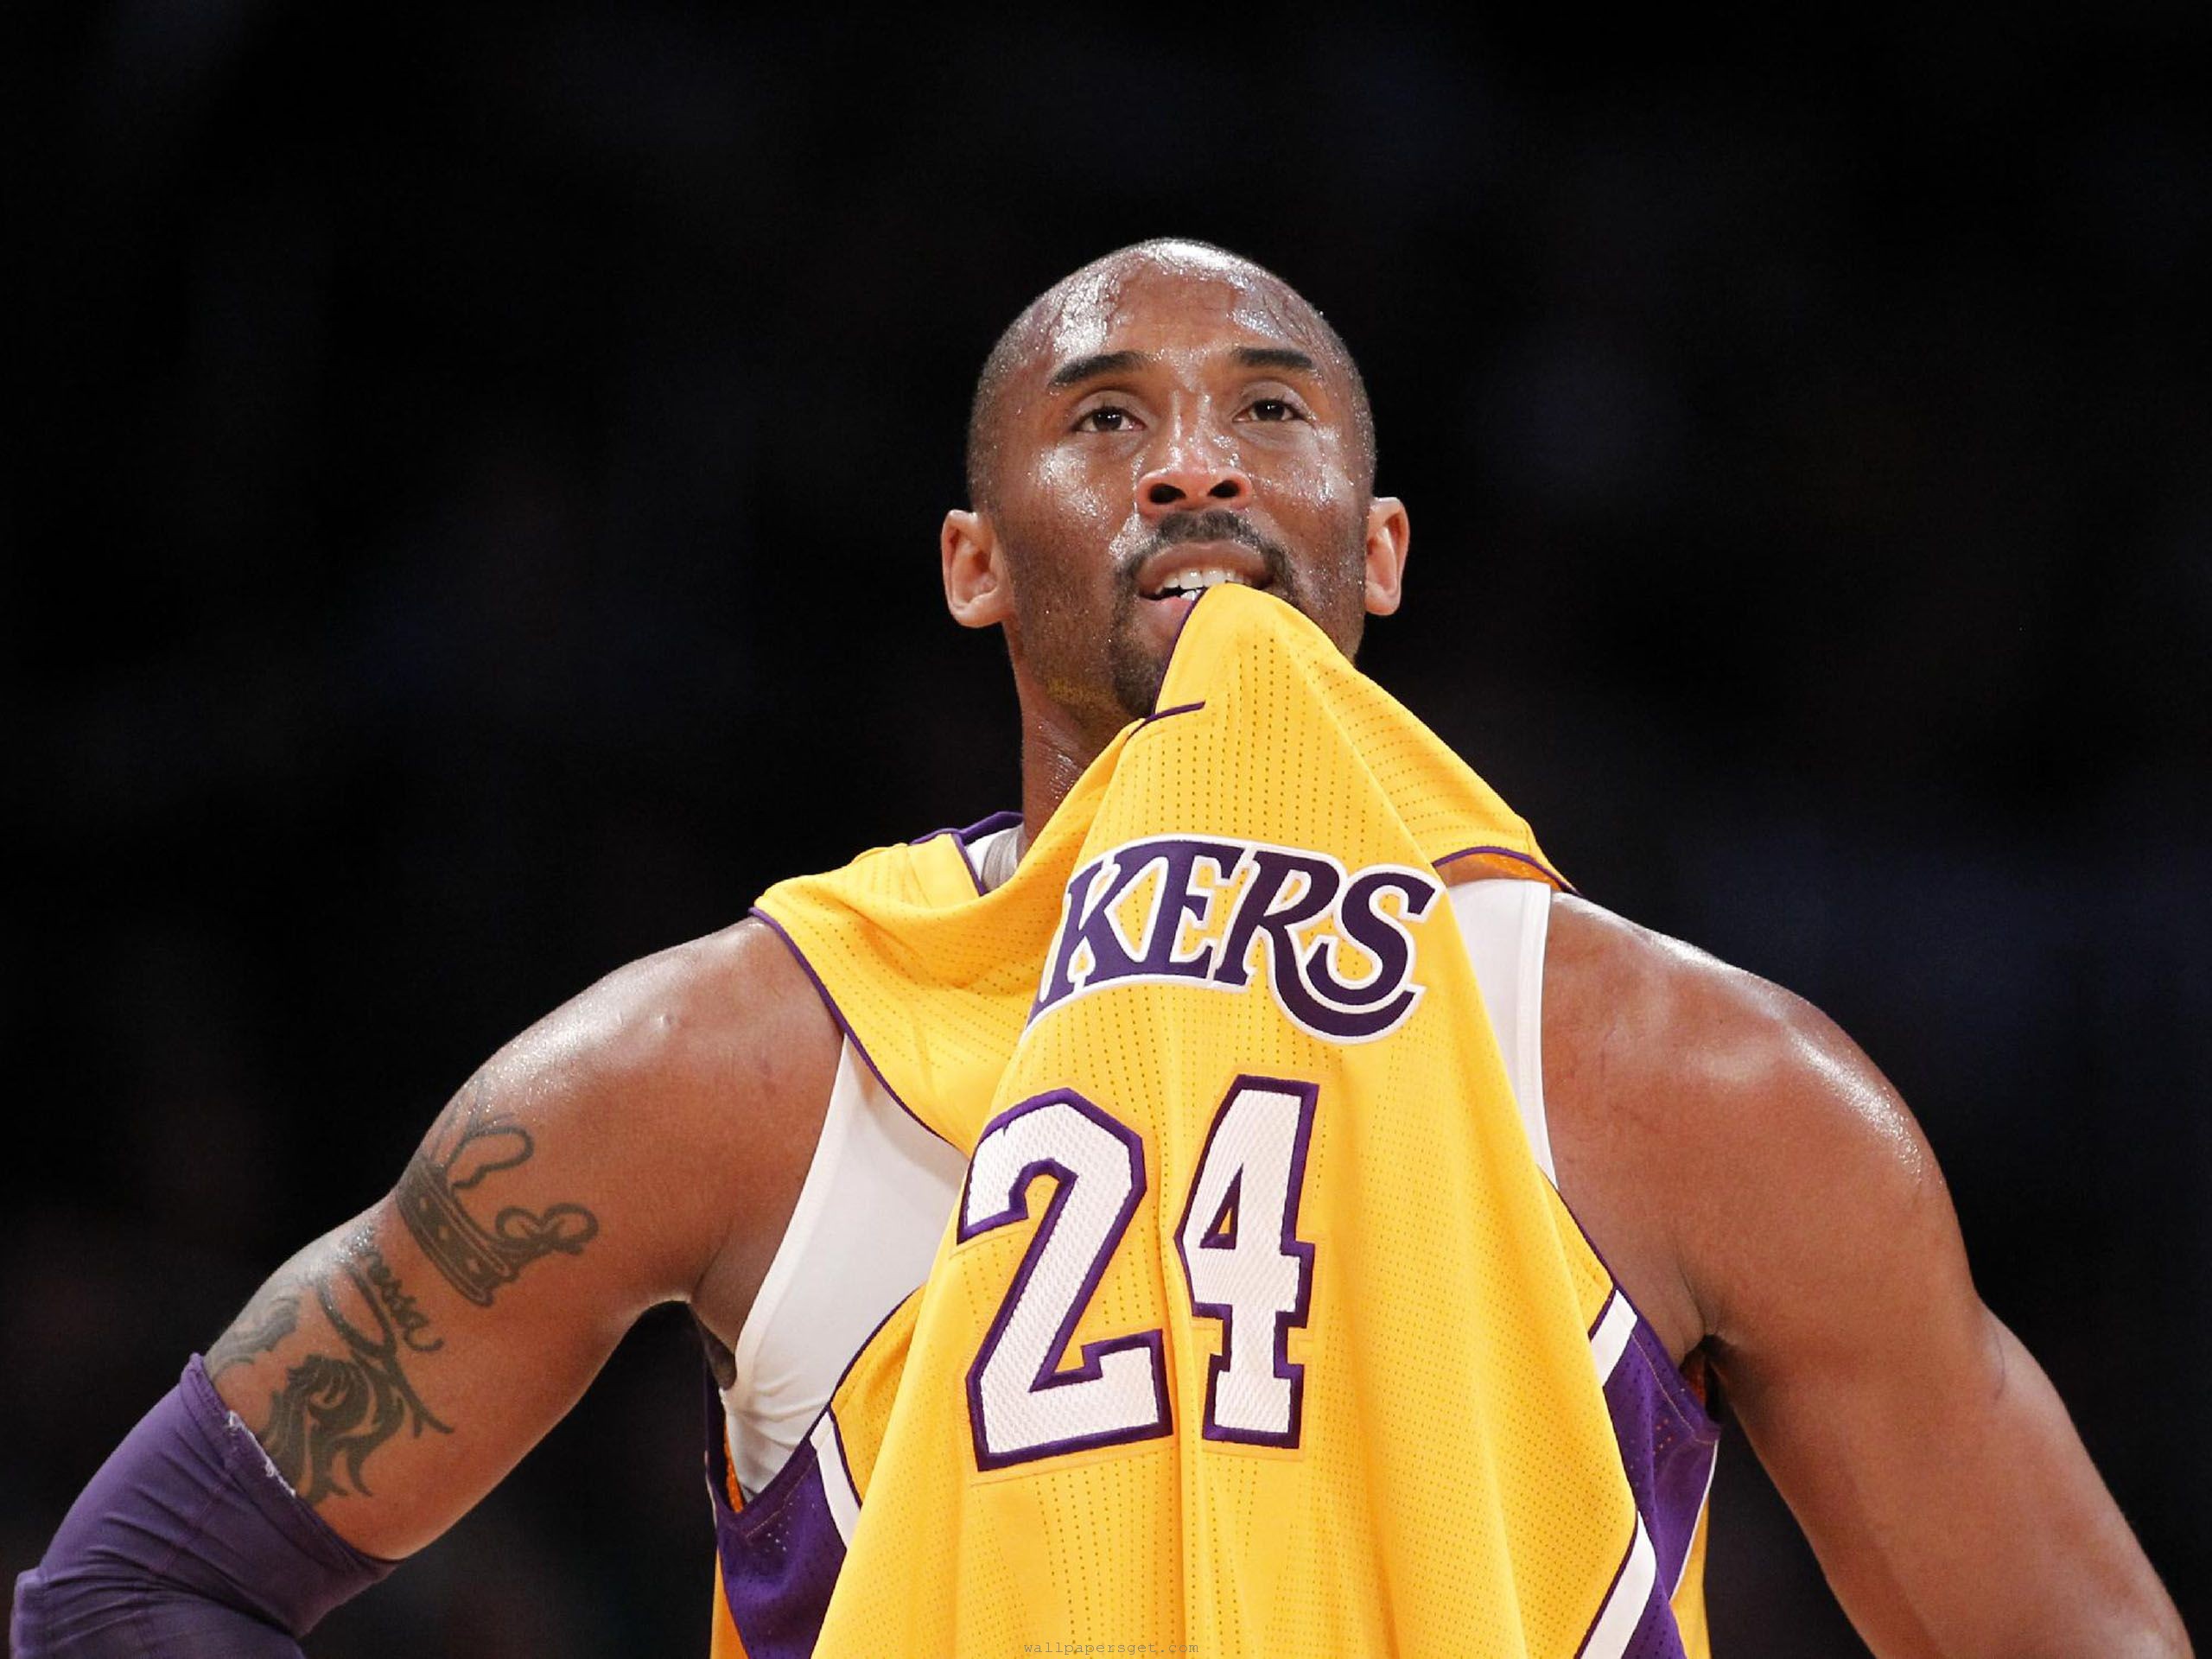 Kobe Bryant Wallpaper Pictures In High Definition Or